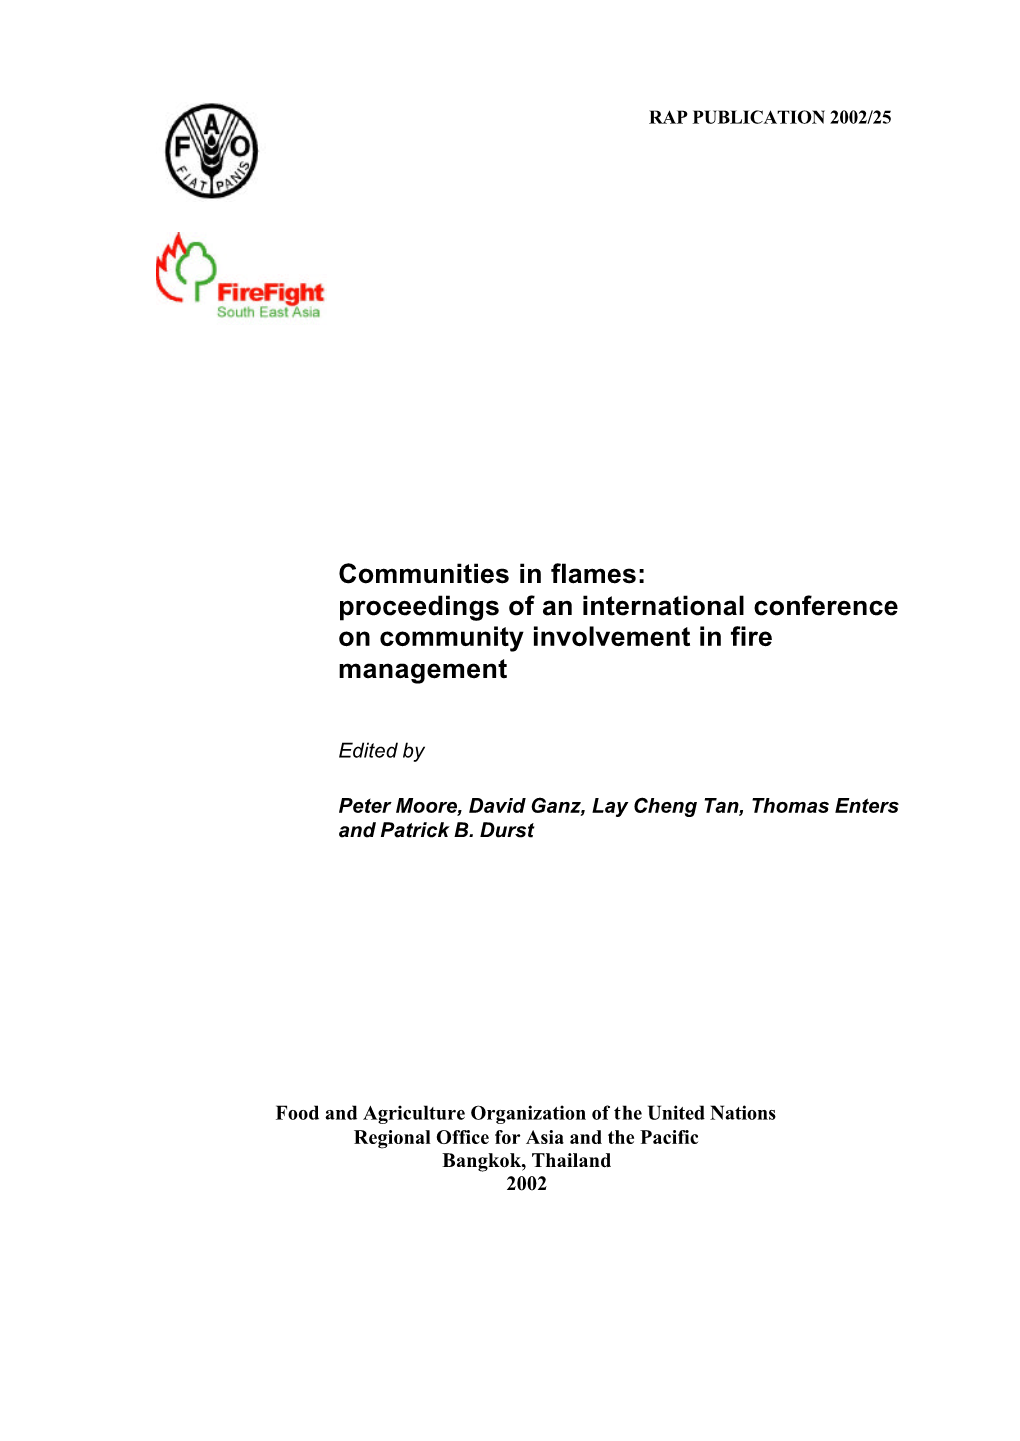 Communities in Flames: Proceedings of an International Conference on Community Involvement in Fire Management